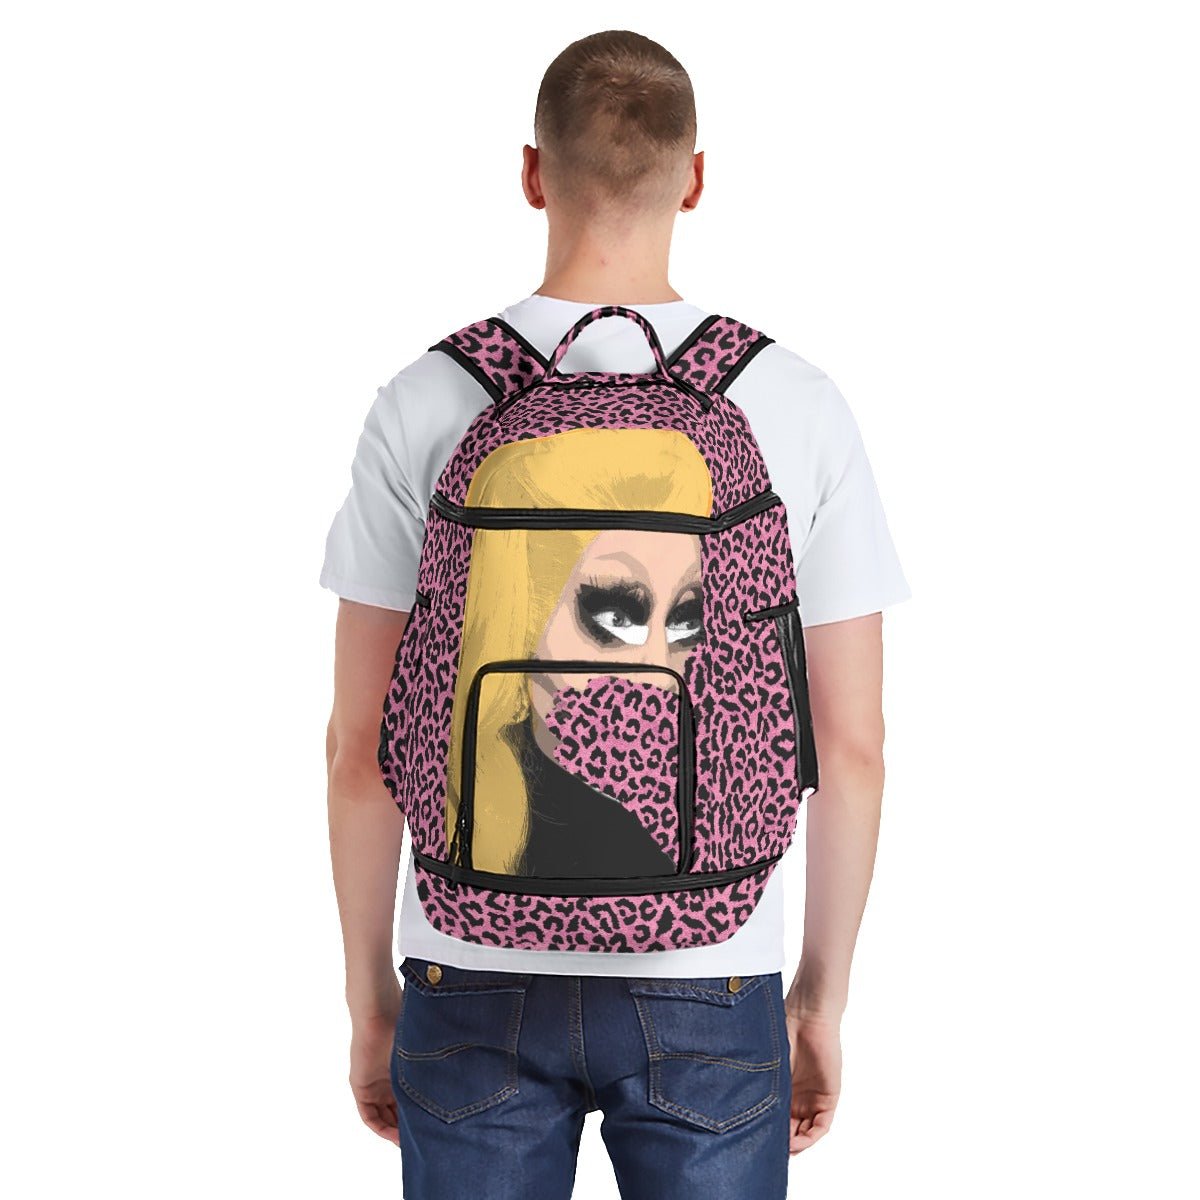 Trixie Matel - Leopard Gasp Large Backpack - dragqueenmerch